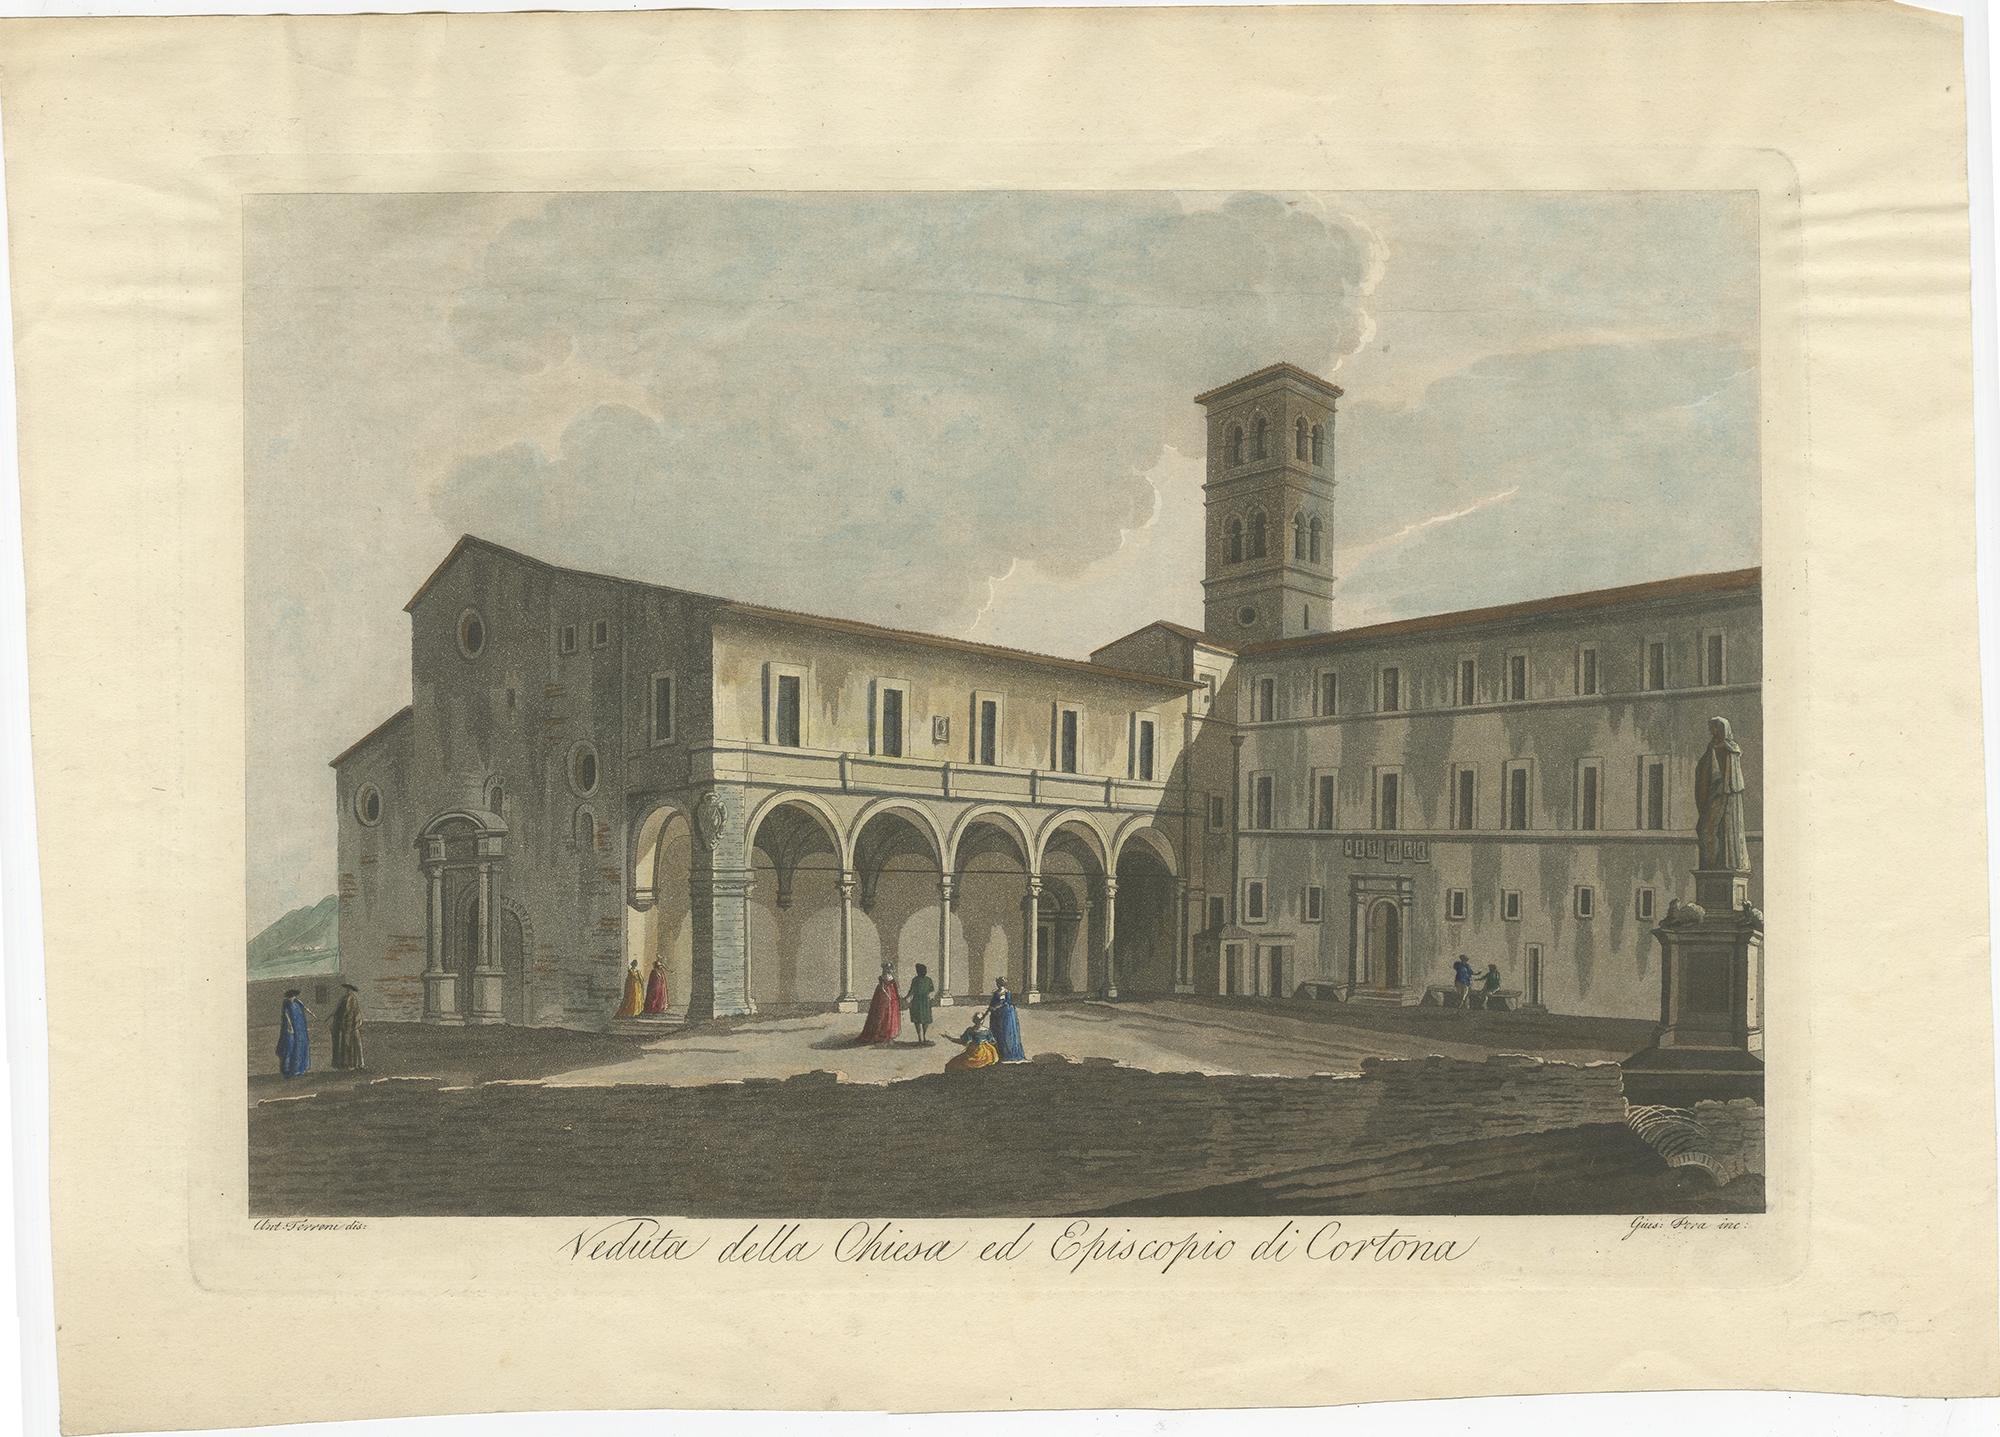 Antique print titled 'Veduta della Chiesa ed Episcopio di Cortona'. 

View of the church of Cortona, a town and comune in the province of Arezzo, in Tuscany, Italy. Source unknown, to be determined. Published circa 1800. 

Artists and Engravers: